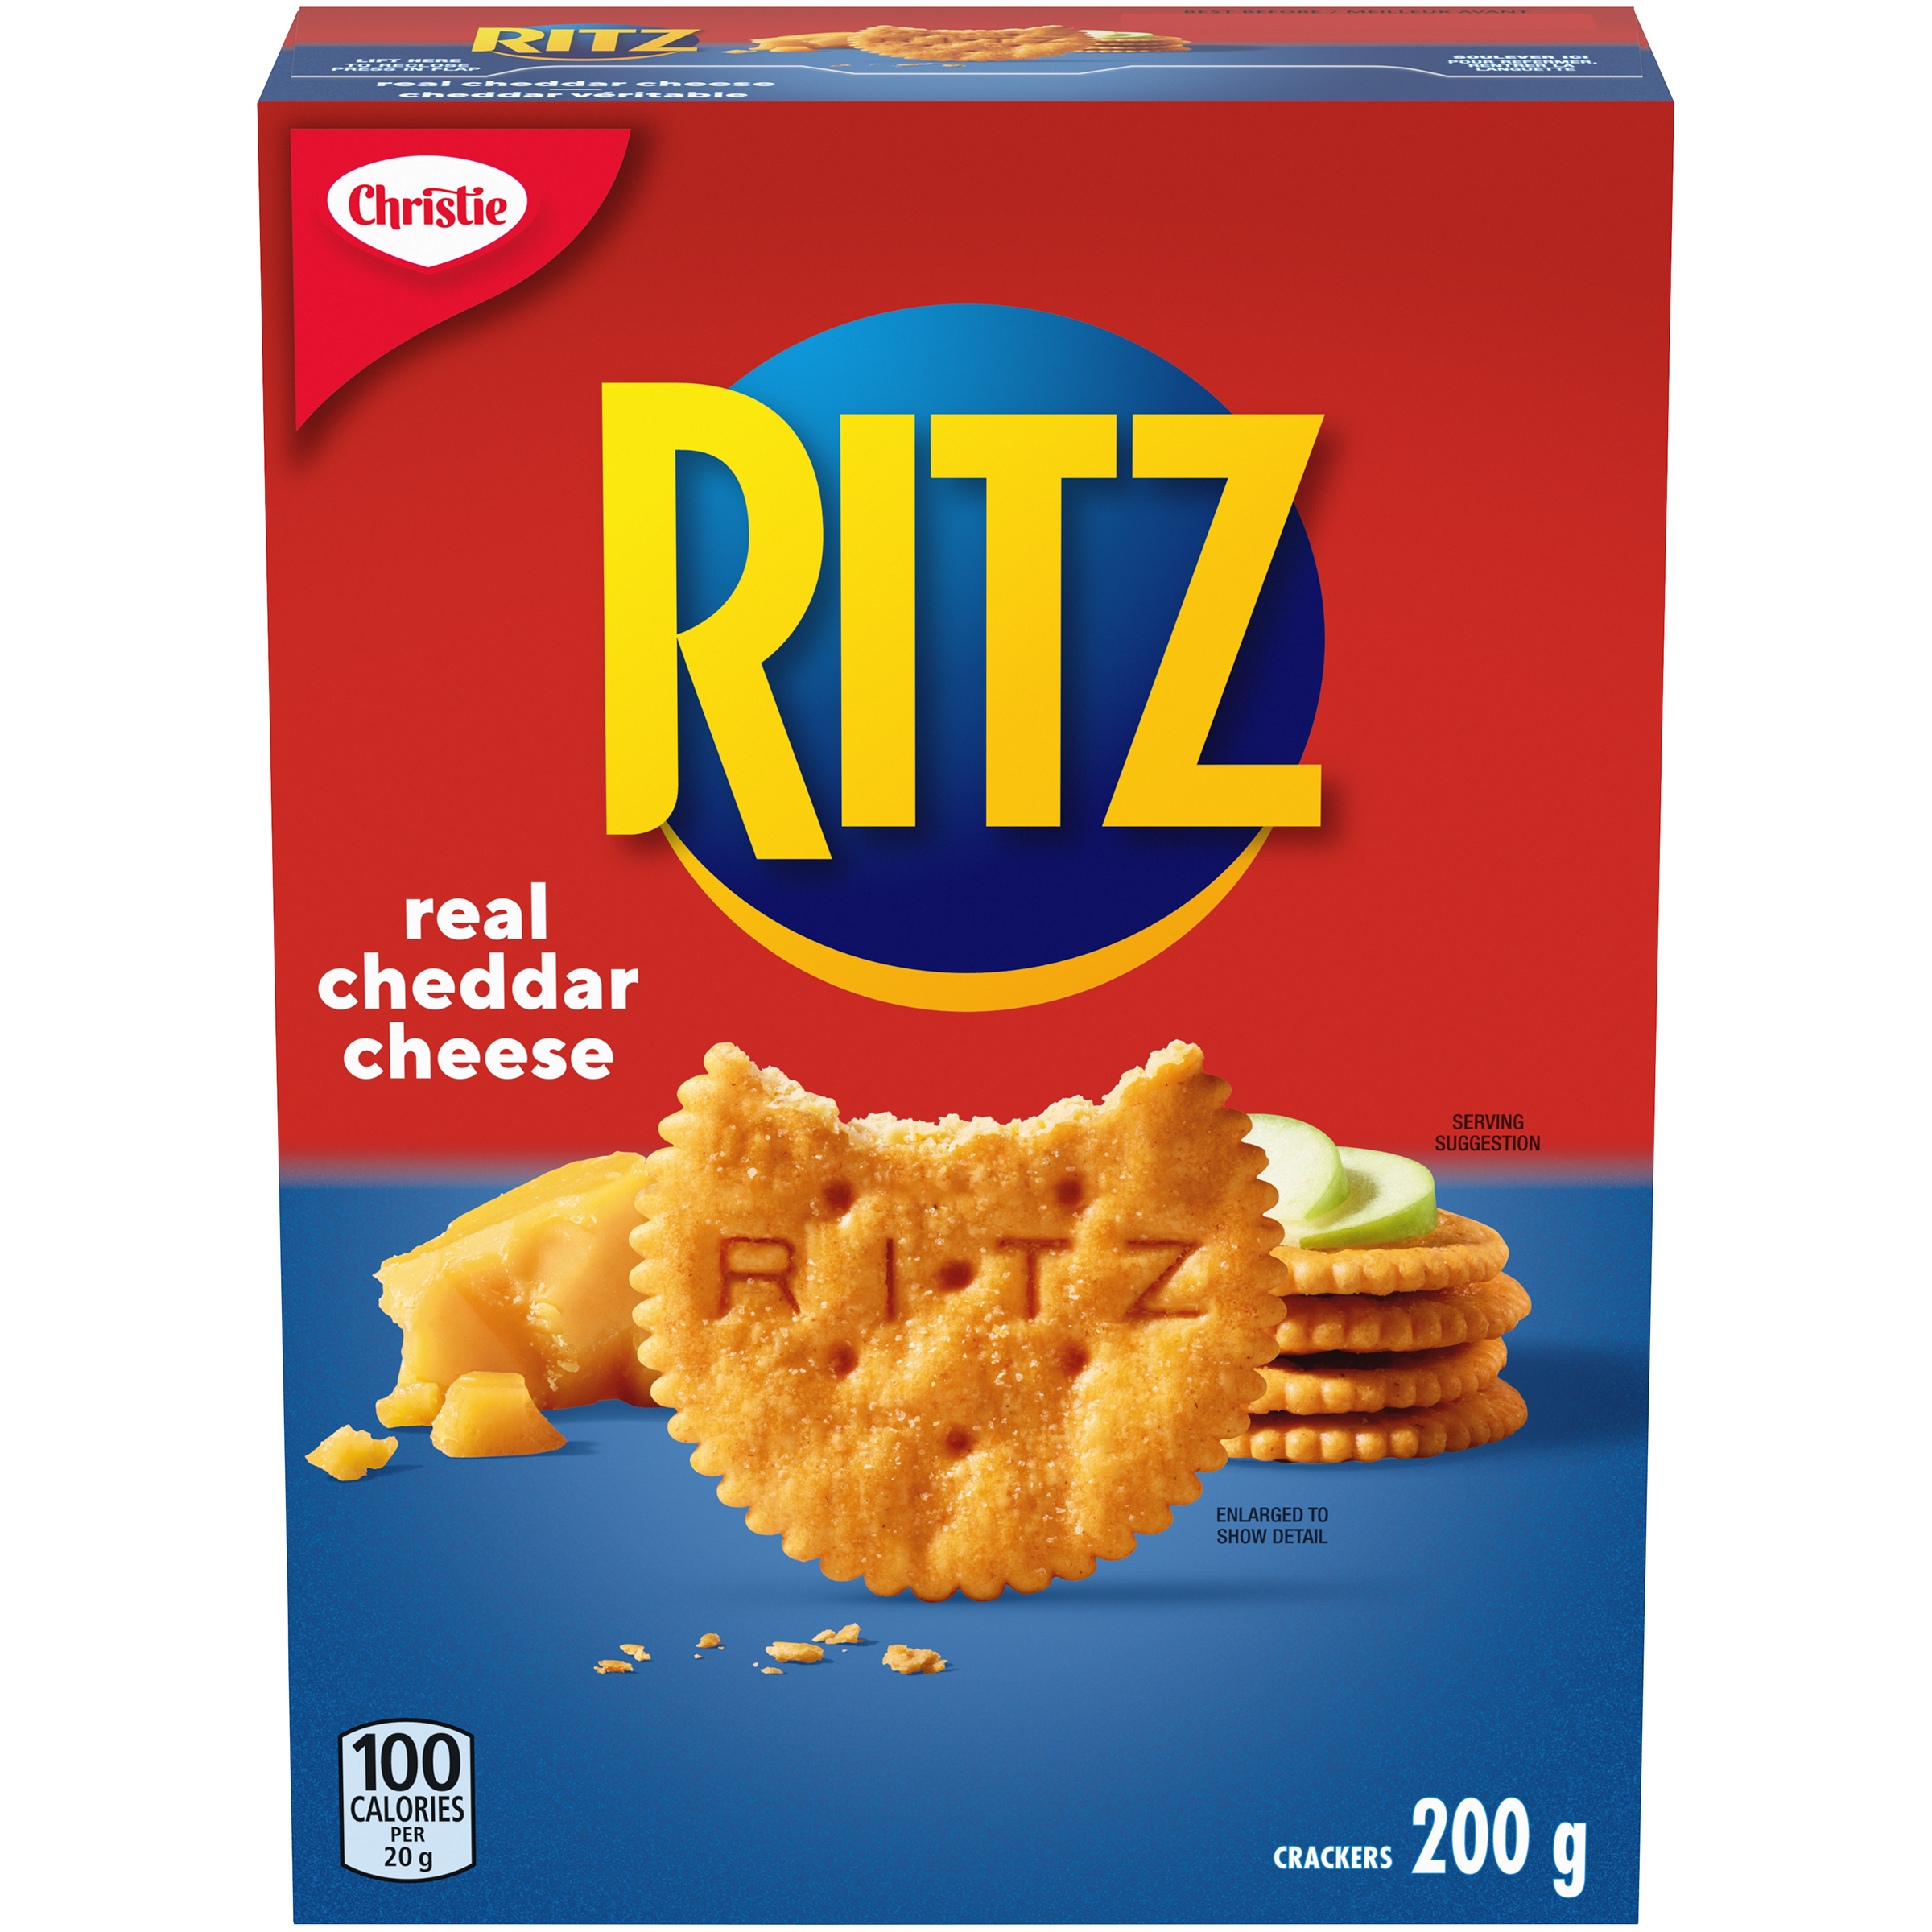 RITZ Real Cheddar Cheese Crackers, 200 g